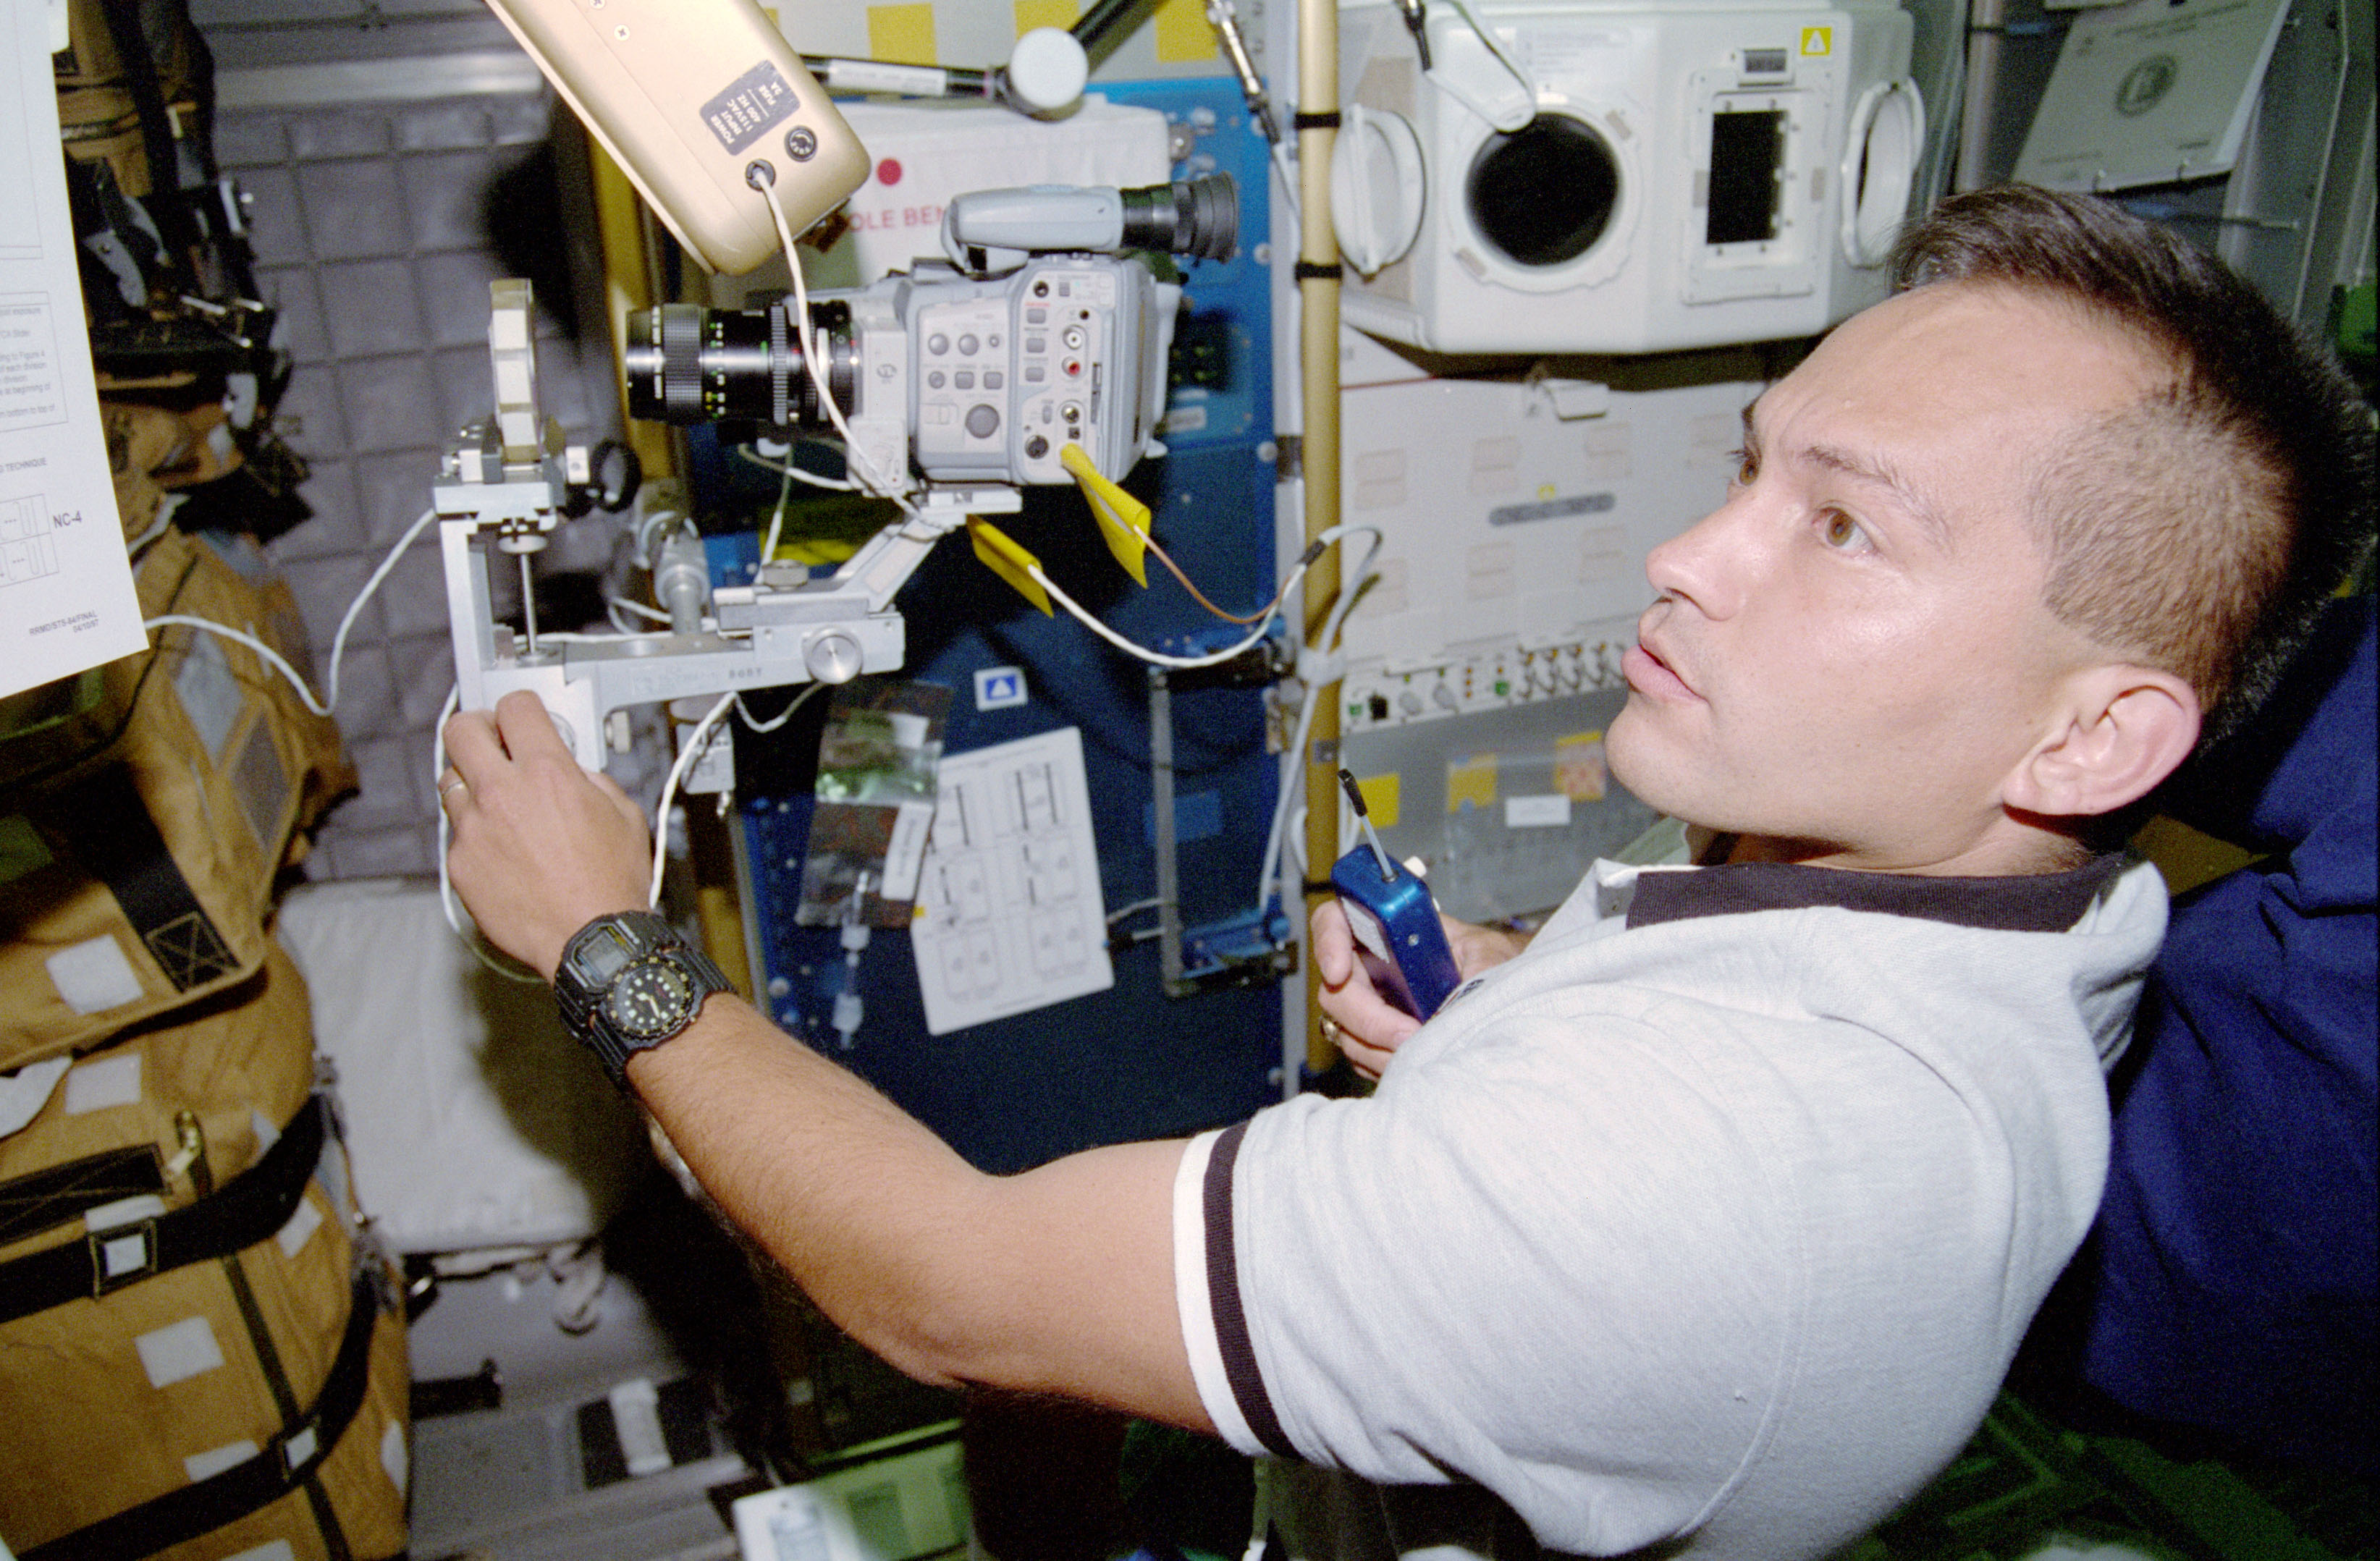 Noriega working on an experiment in the Spacehab module